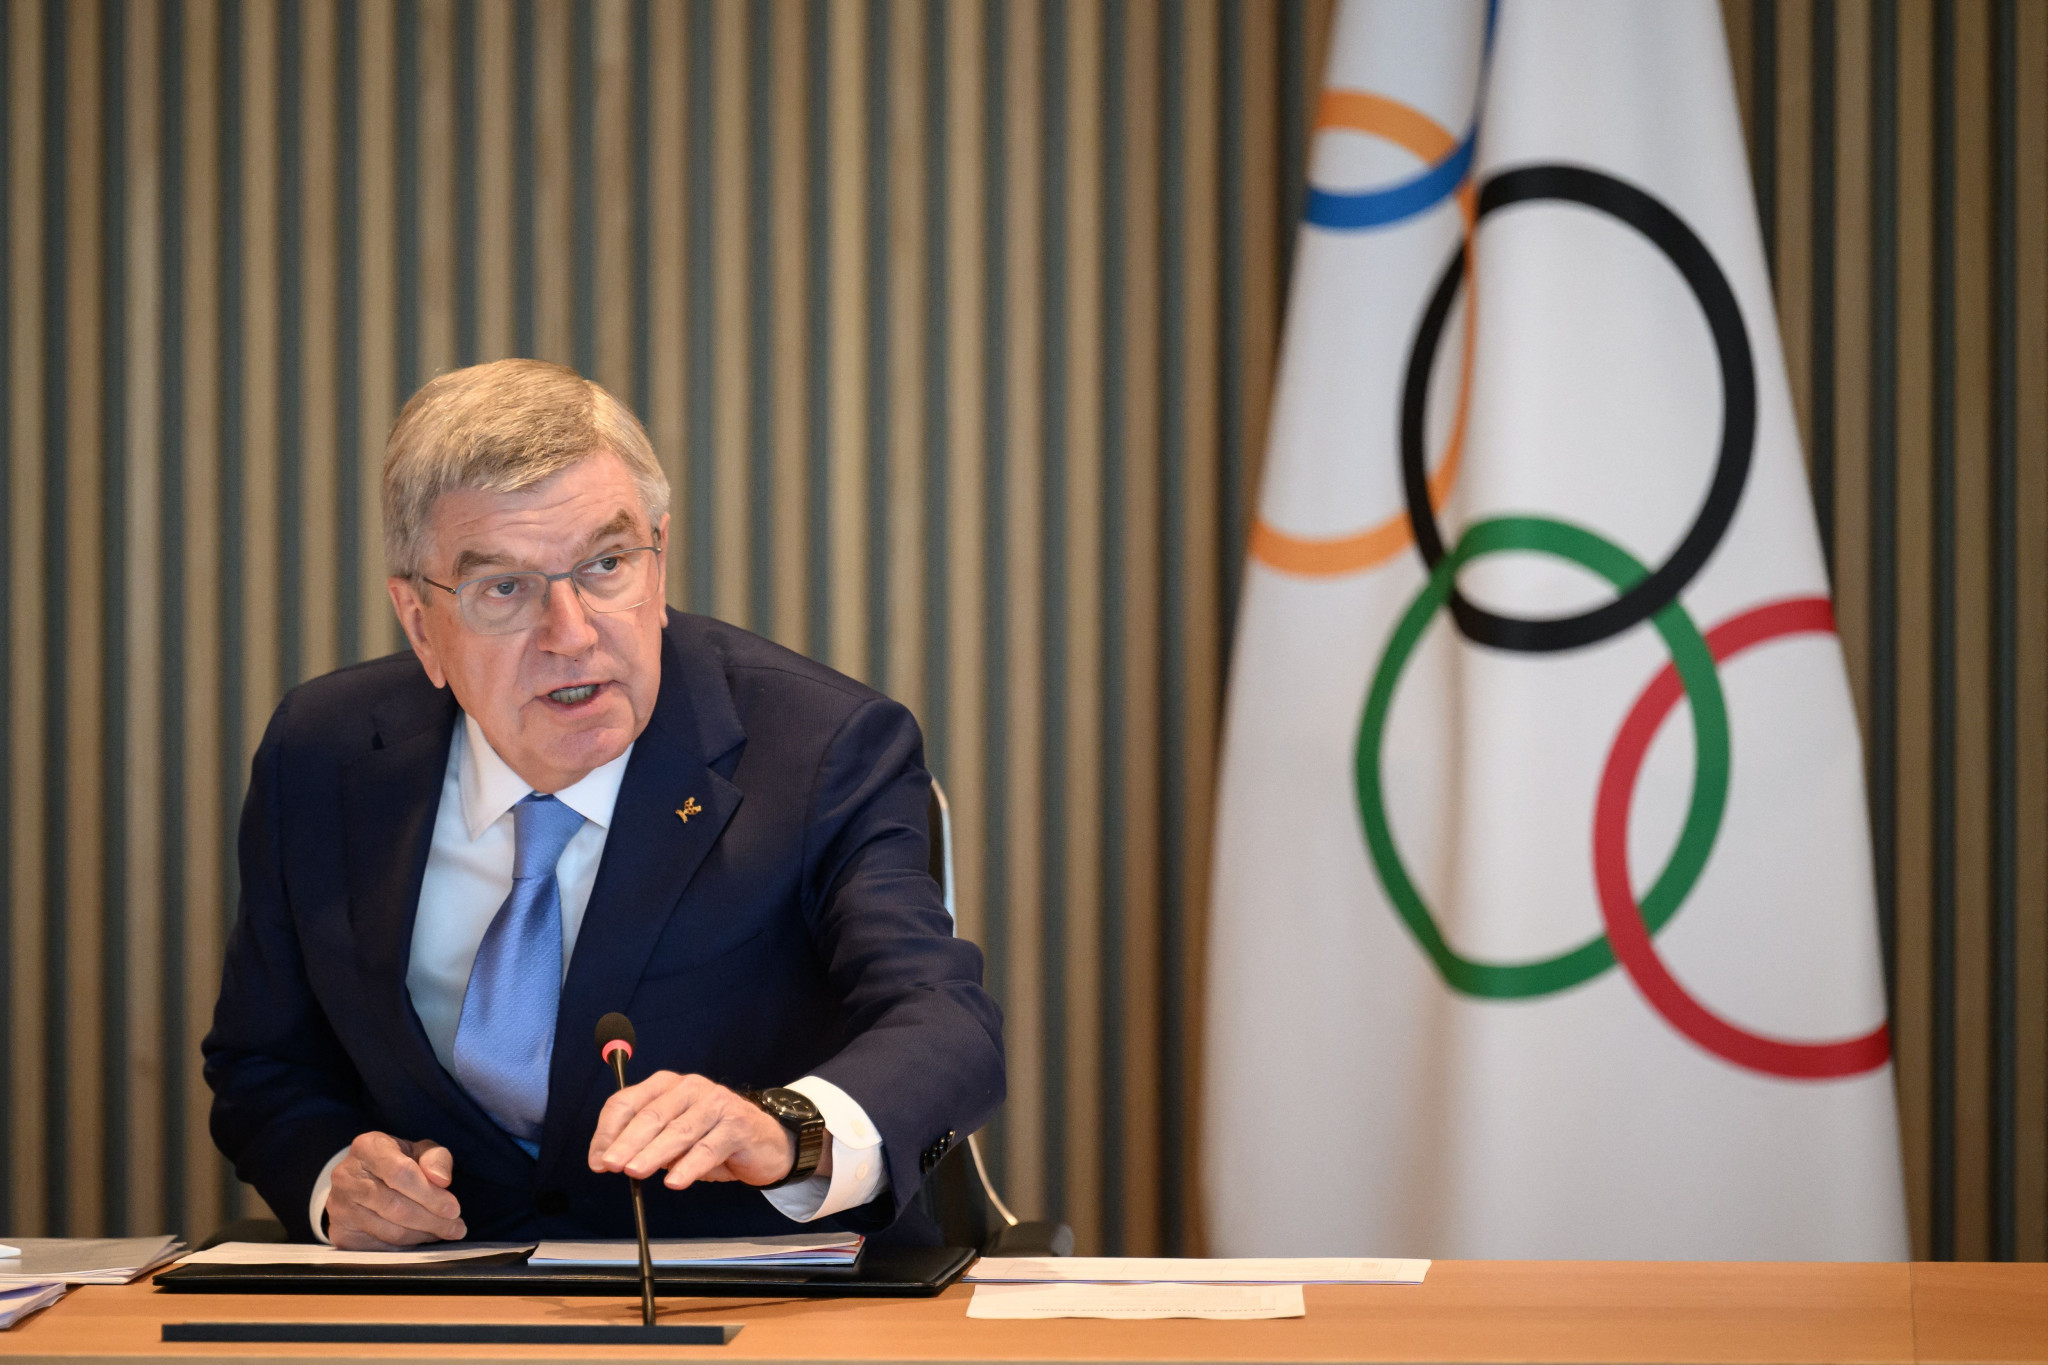 The IOC led by Olympic fencing champion Thomas Bach, recommended the return of Russian and Belarusian athletes as neutrals despite a letter from more than 300 fencers calling on them not to do so ©Getty Images